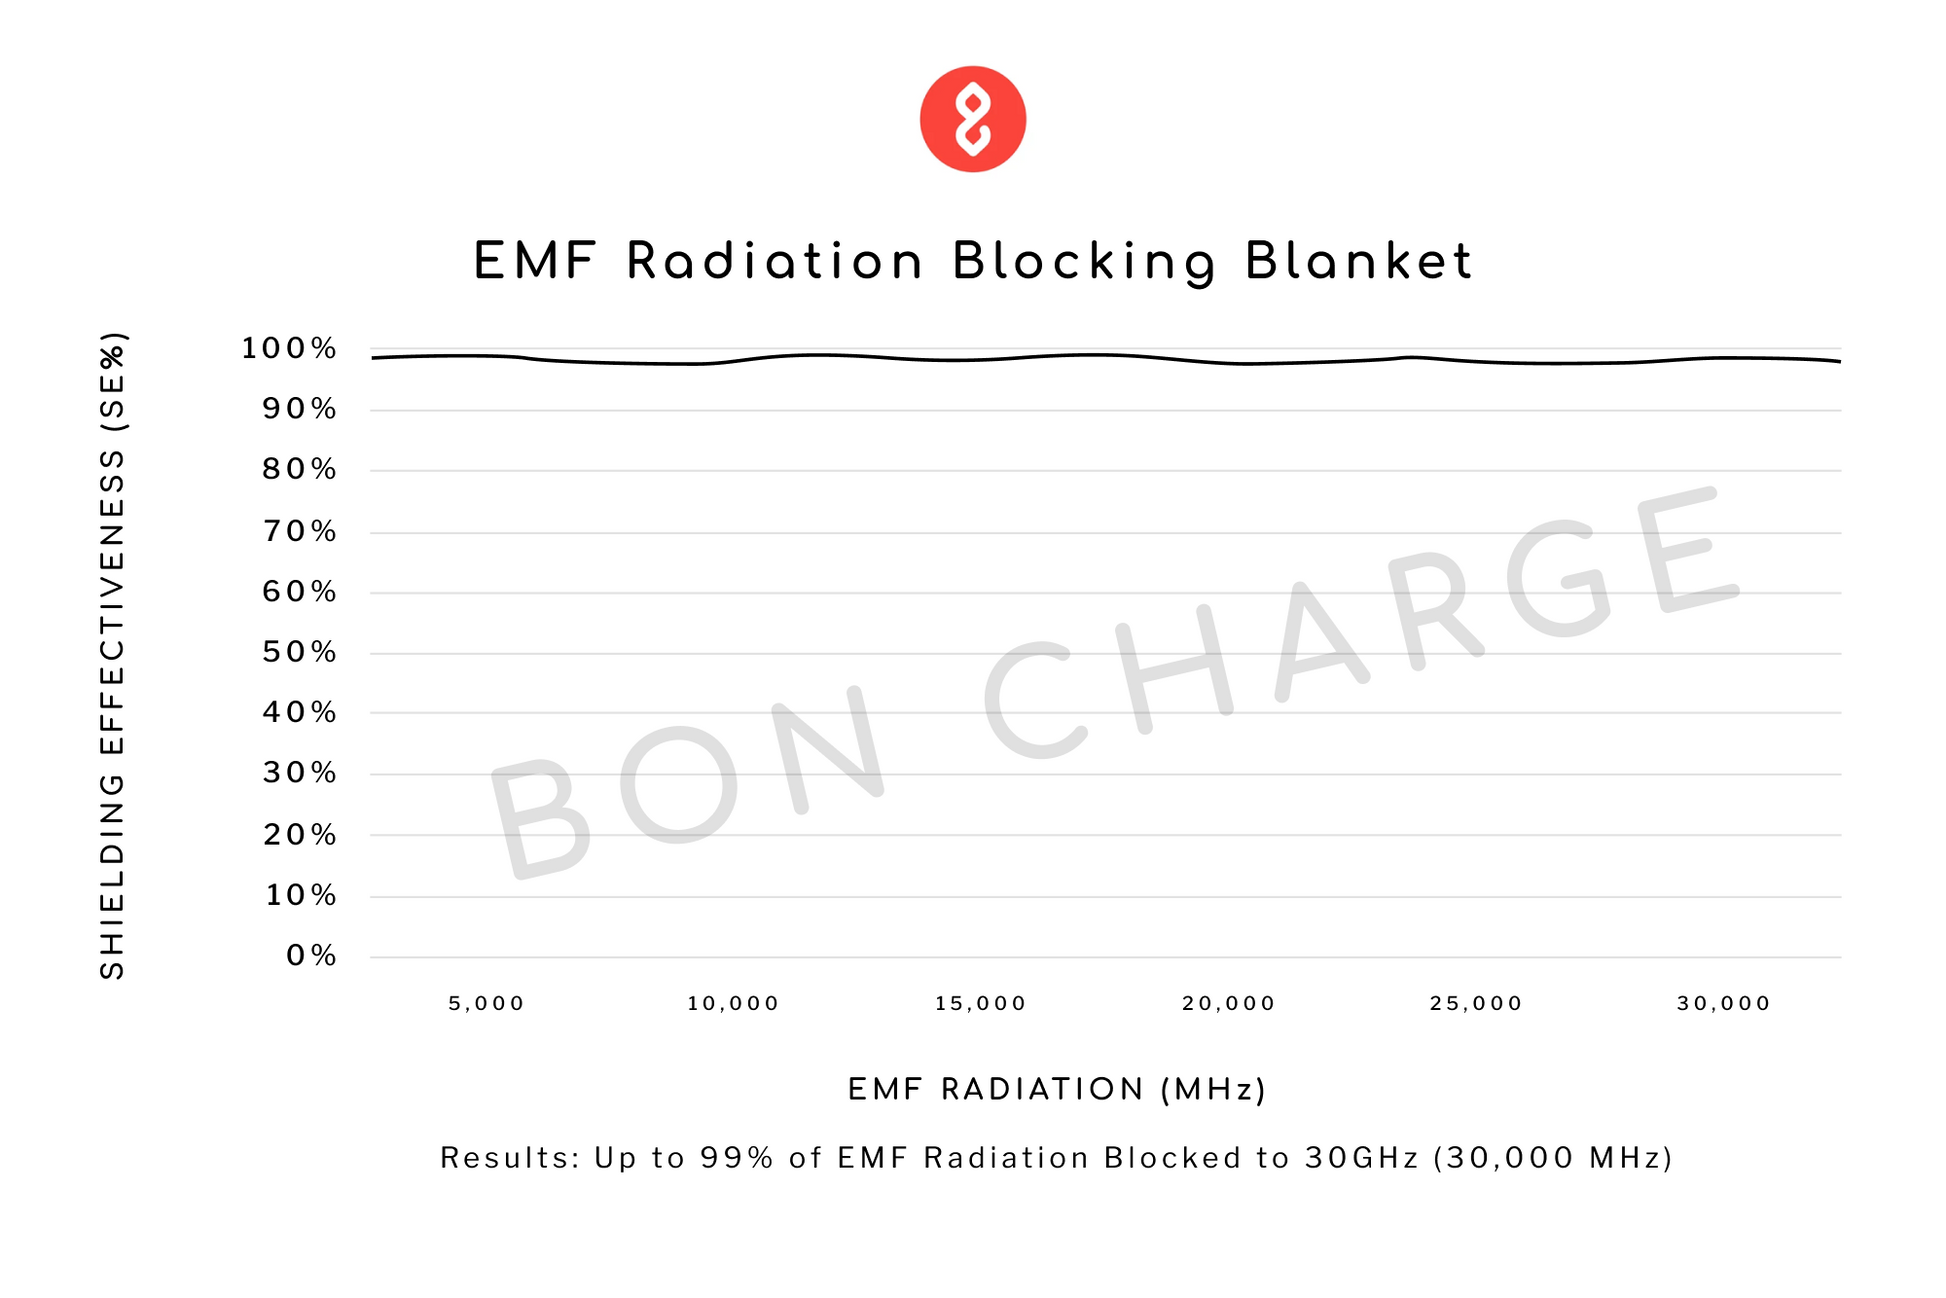 SYB EMF Protection Blanket - 5G Tested - BioElectric Shield